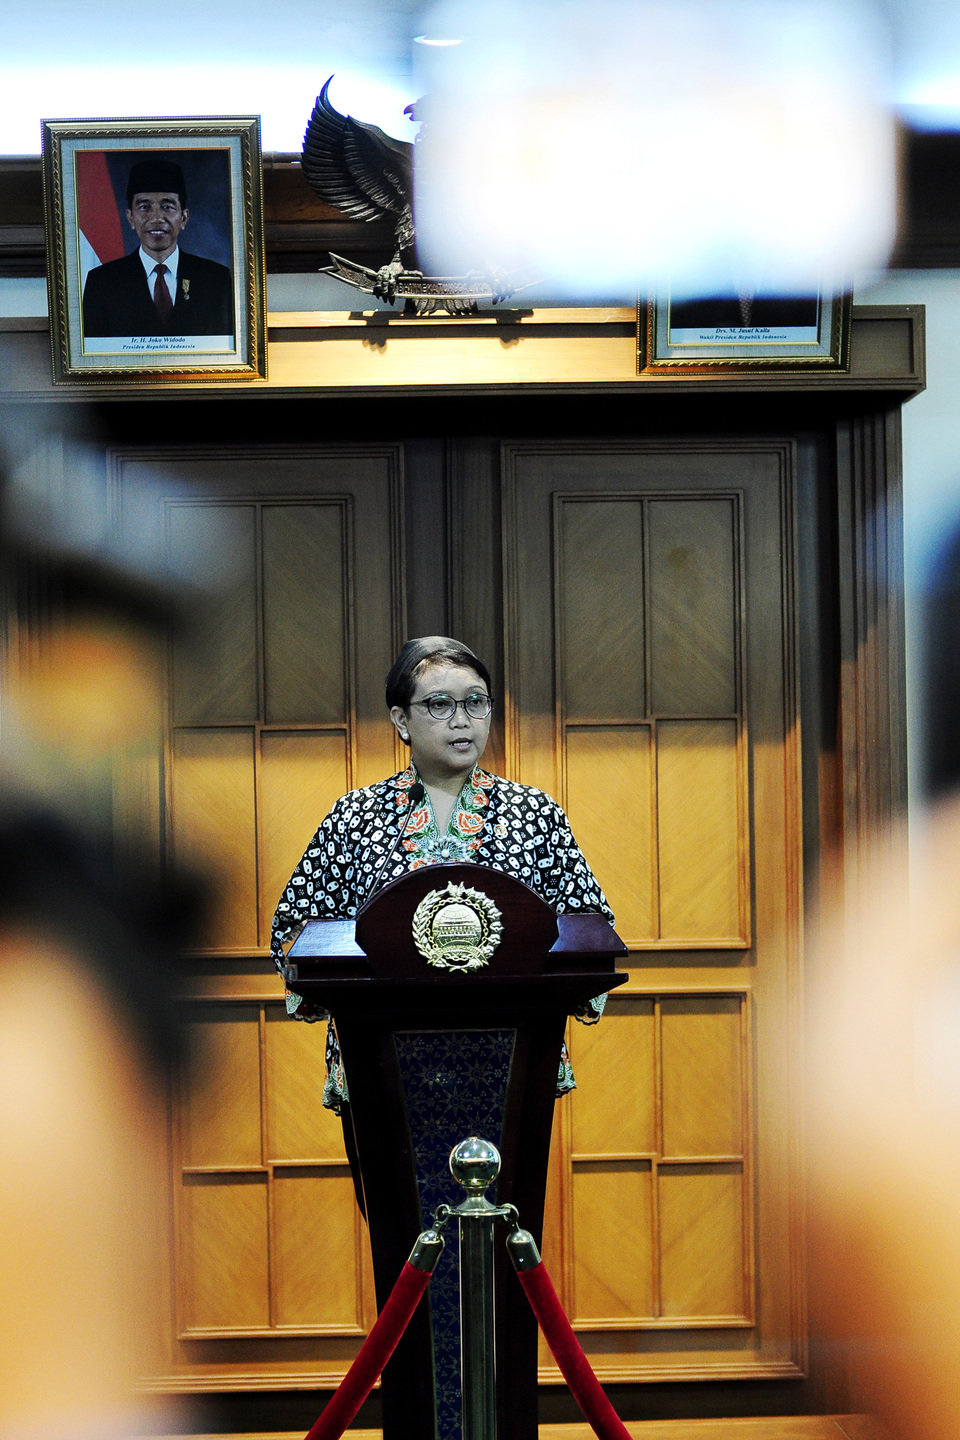 Foreign Minister Retno Marsudi took up the agreement after . (Antara Photo/Suwandy)